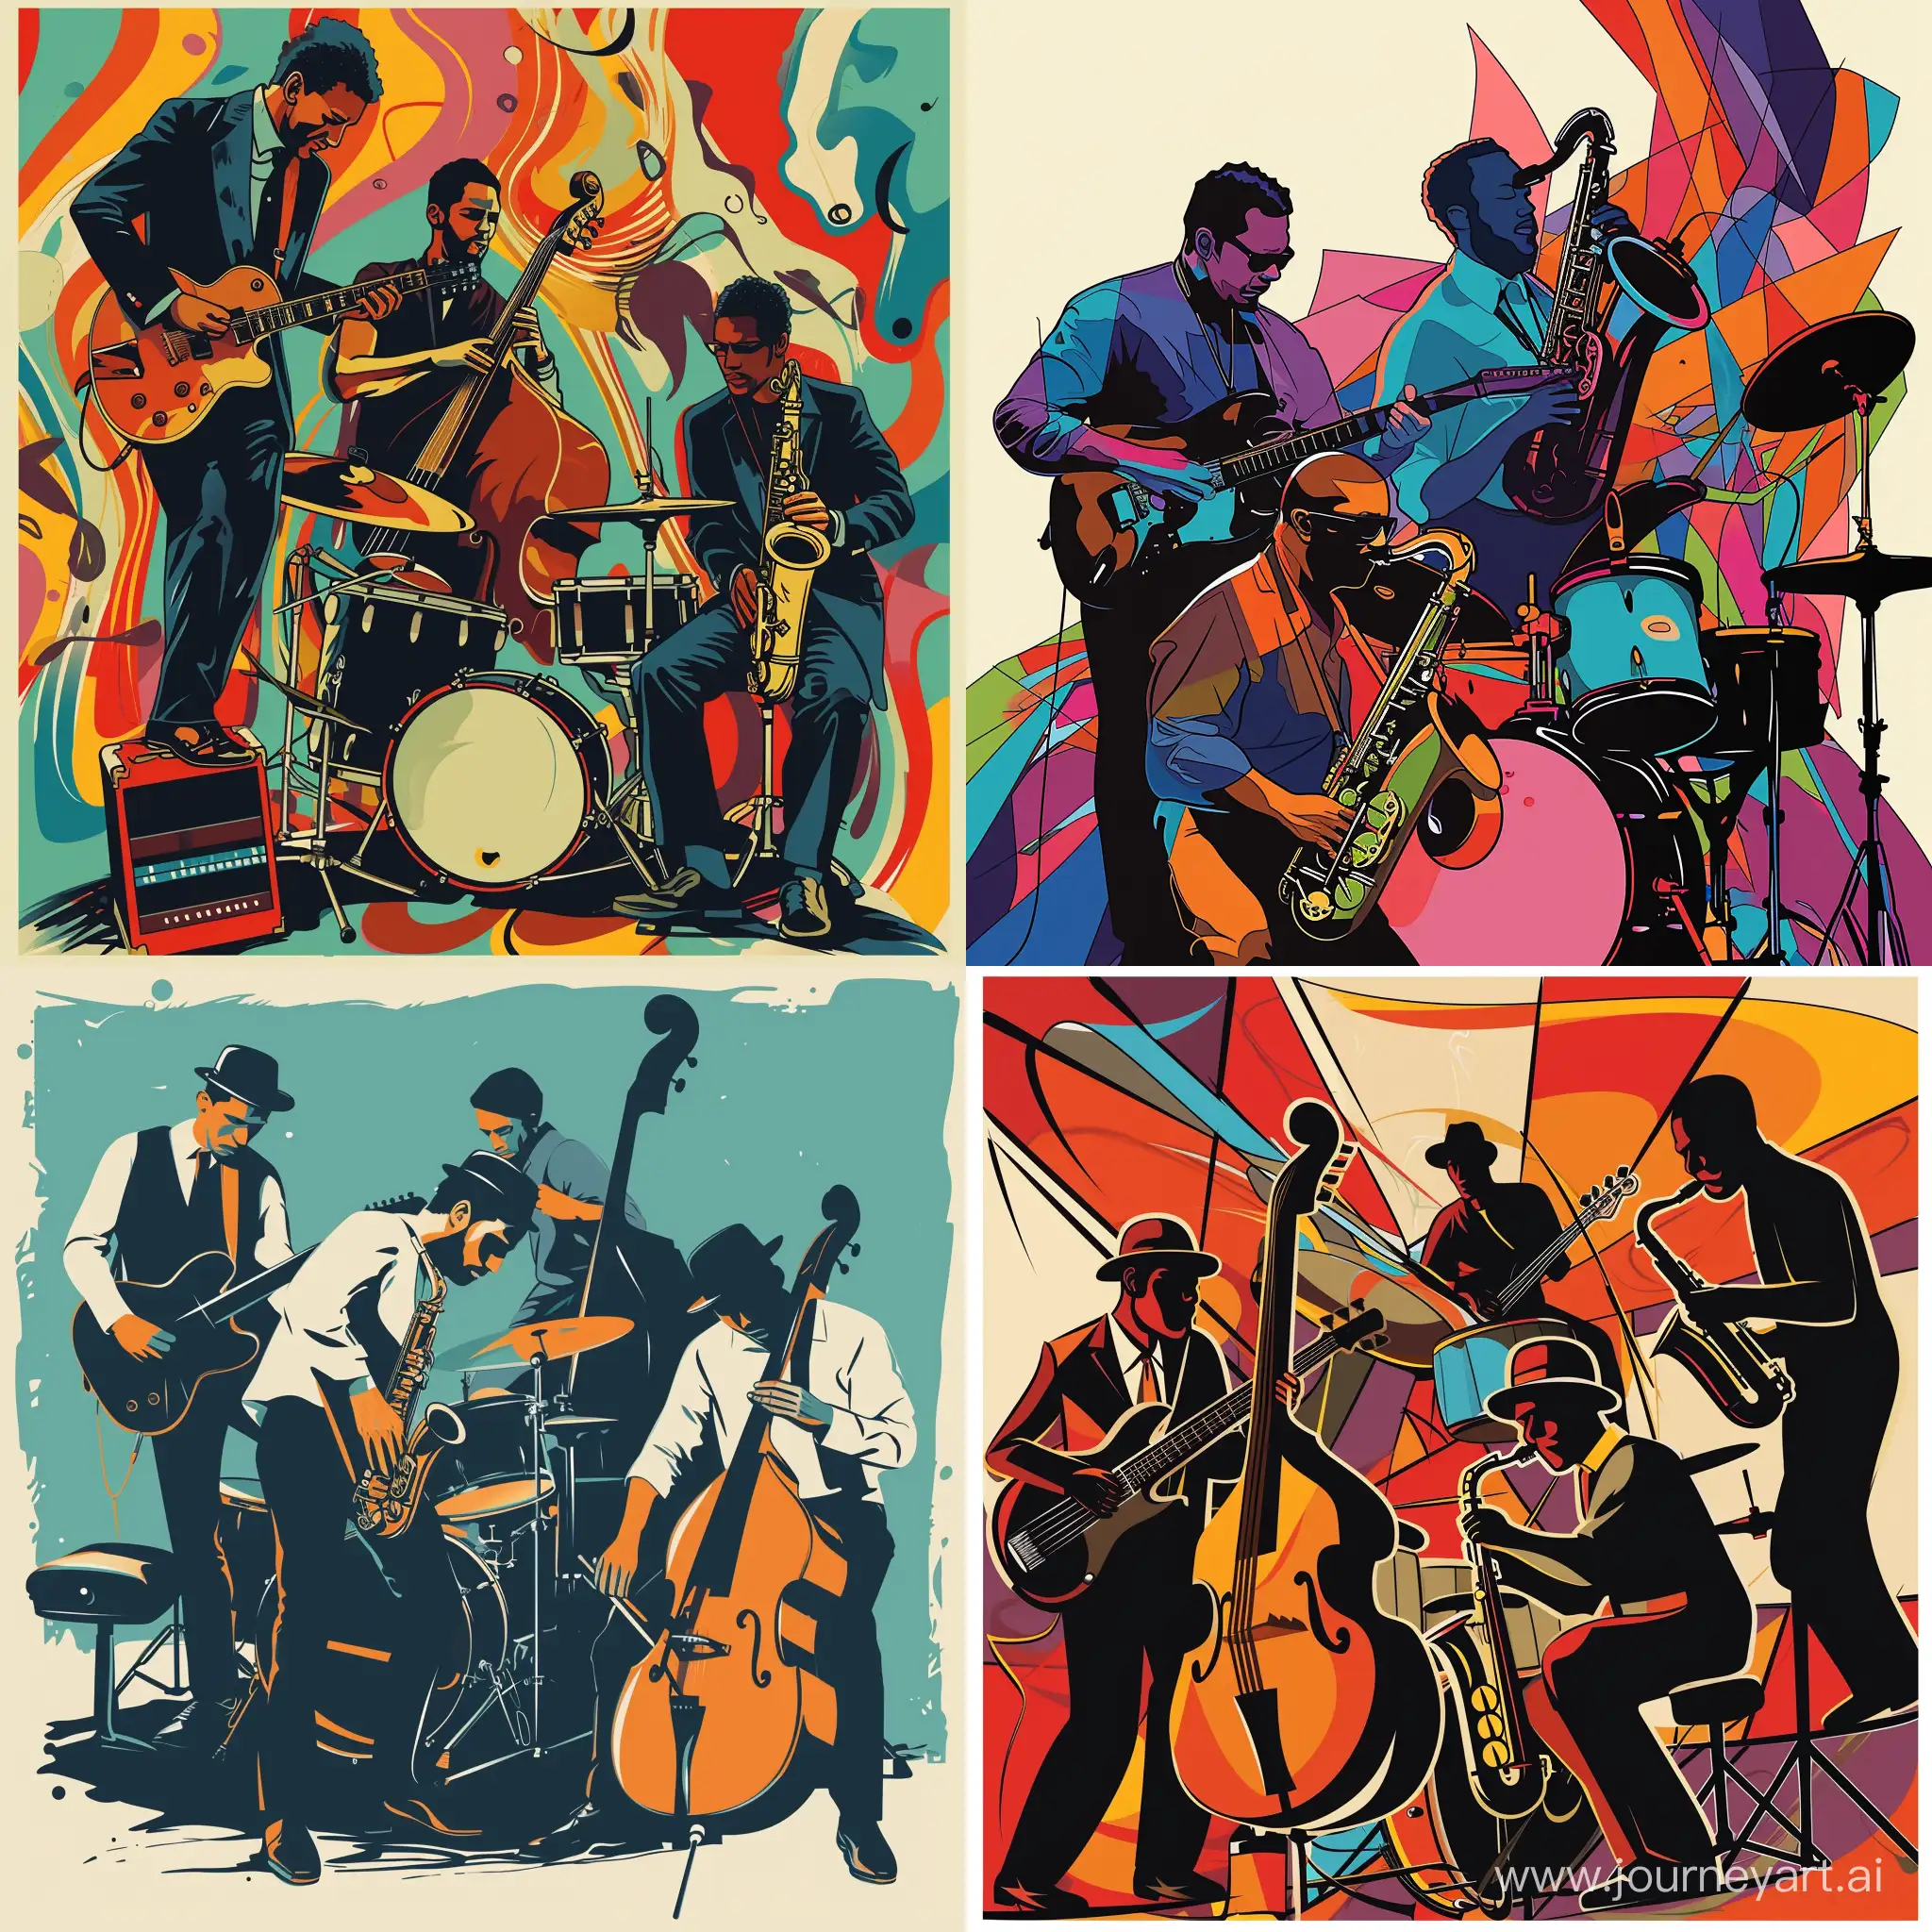 Dynamic-Band-Performance-Poster-with-Guitarist-Saxophonist-Bassist-Drummer-and-Pianist